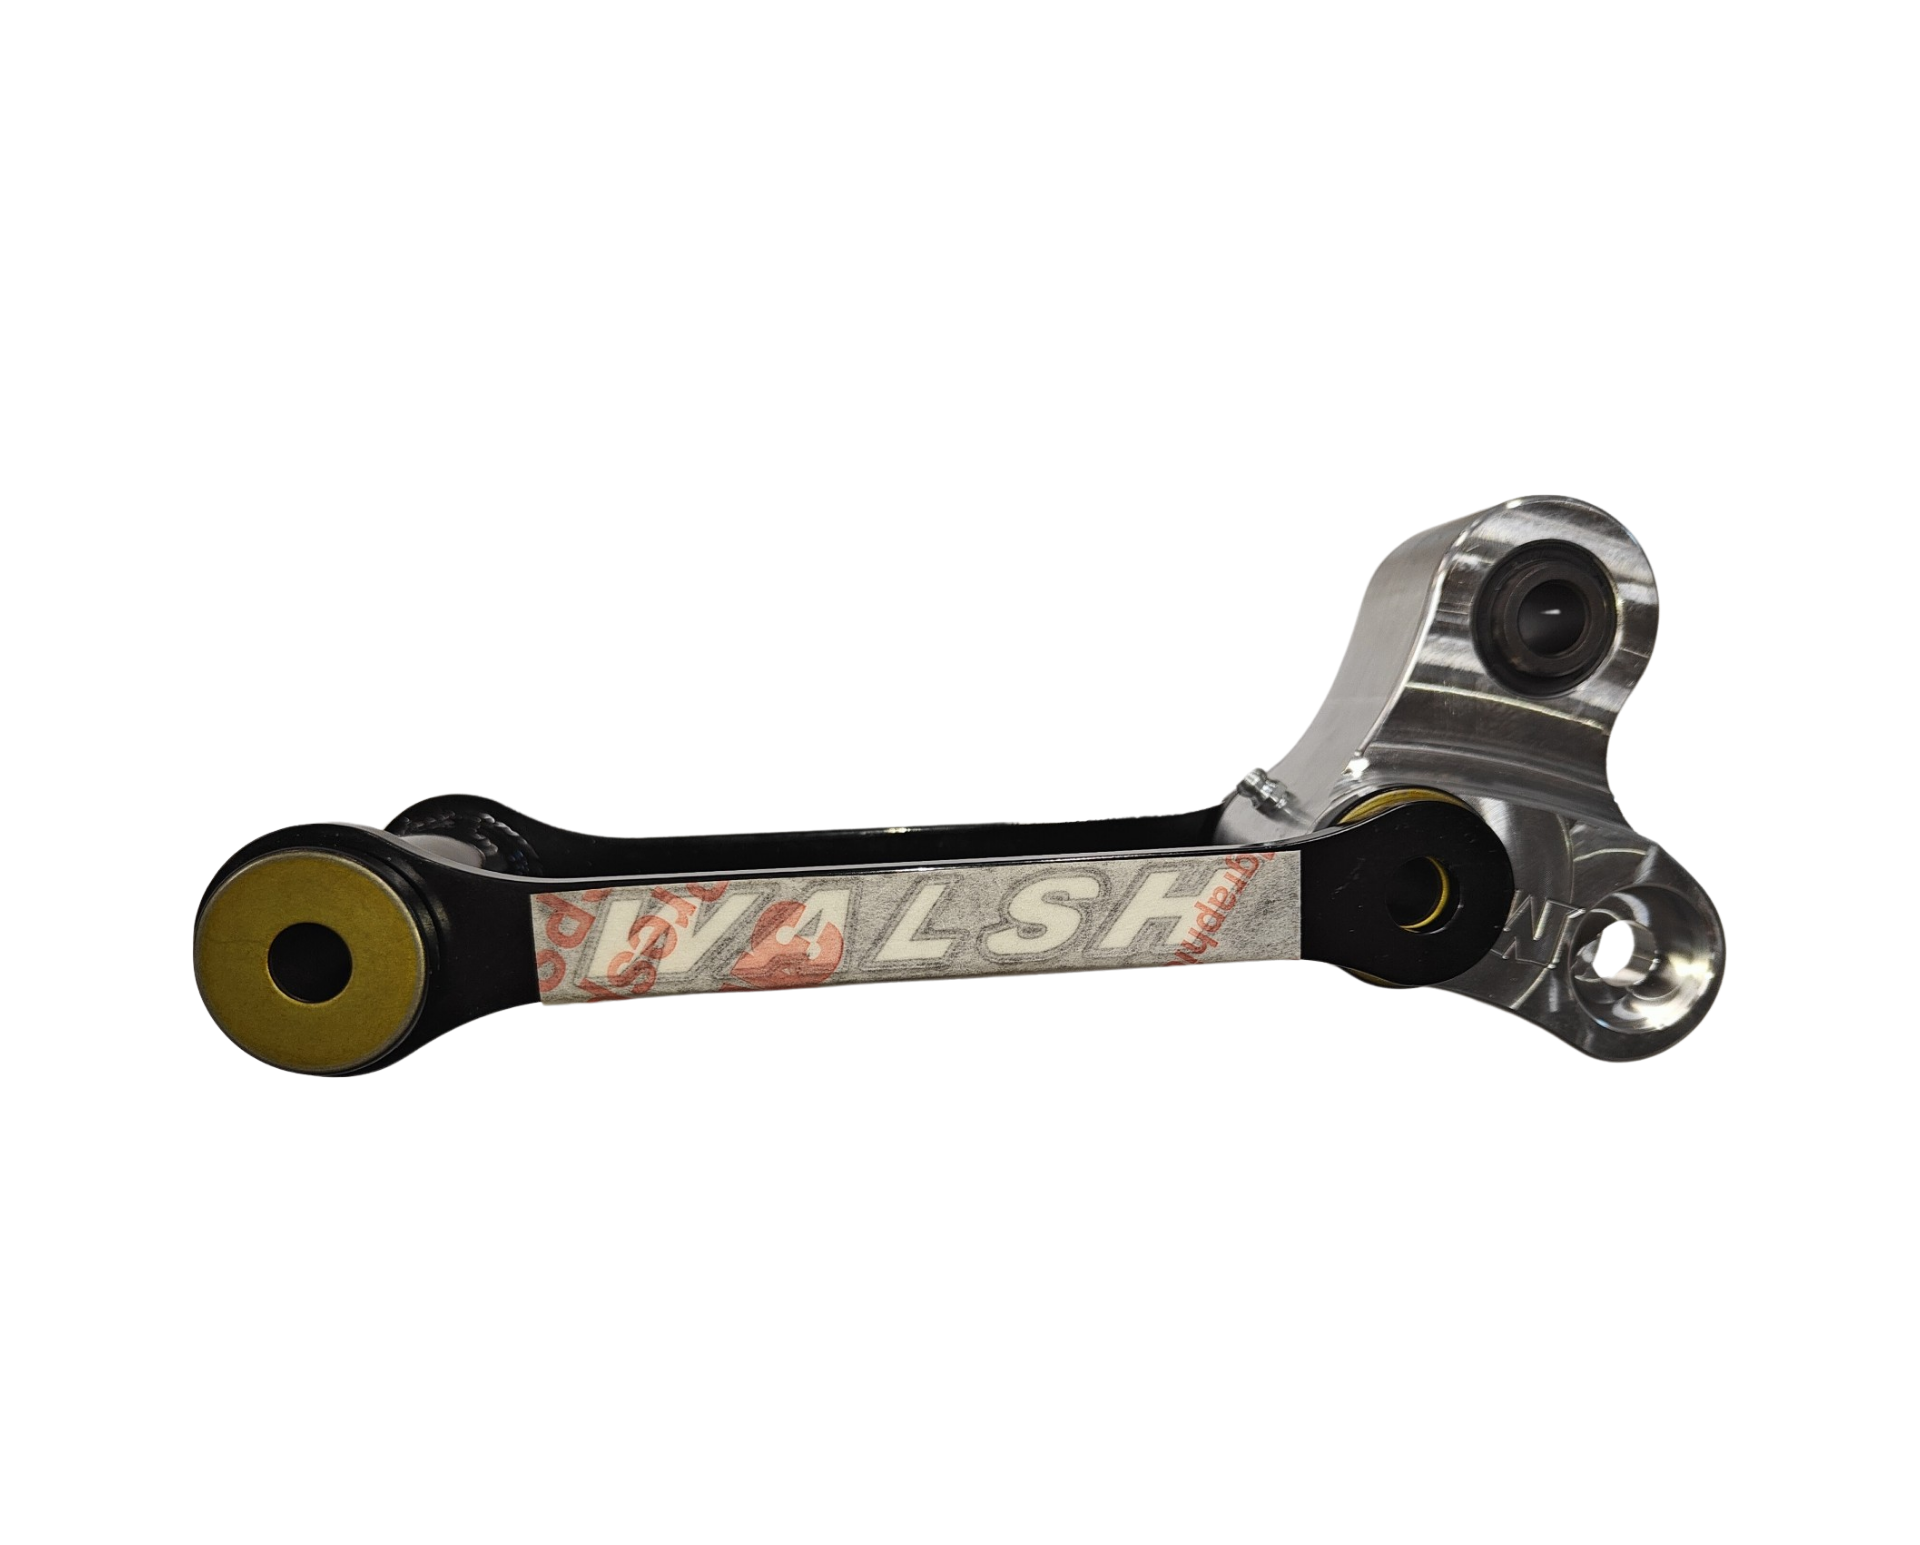 Walsh YFZ450R Linkage MX and XC